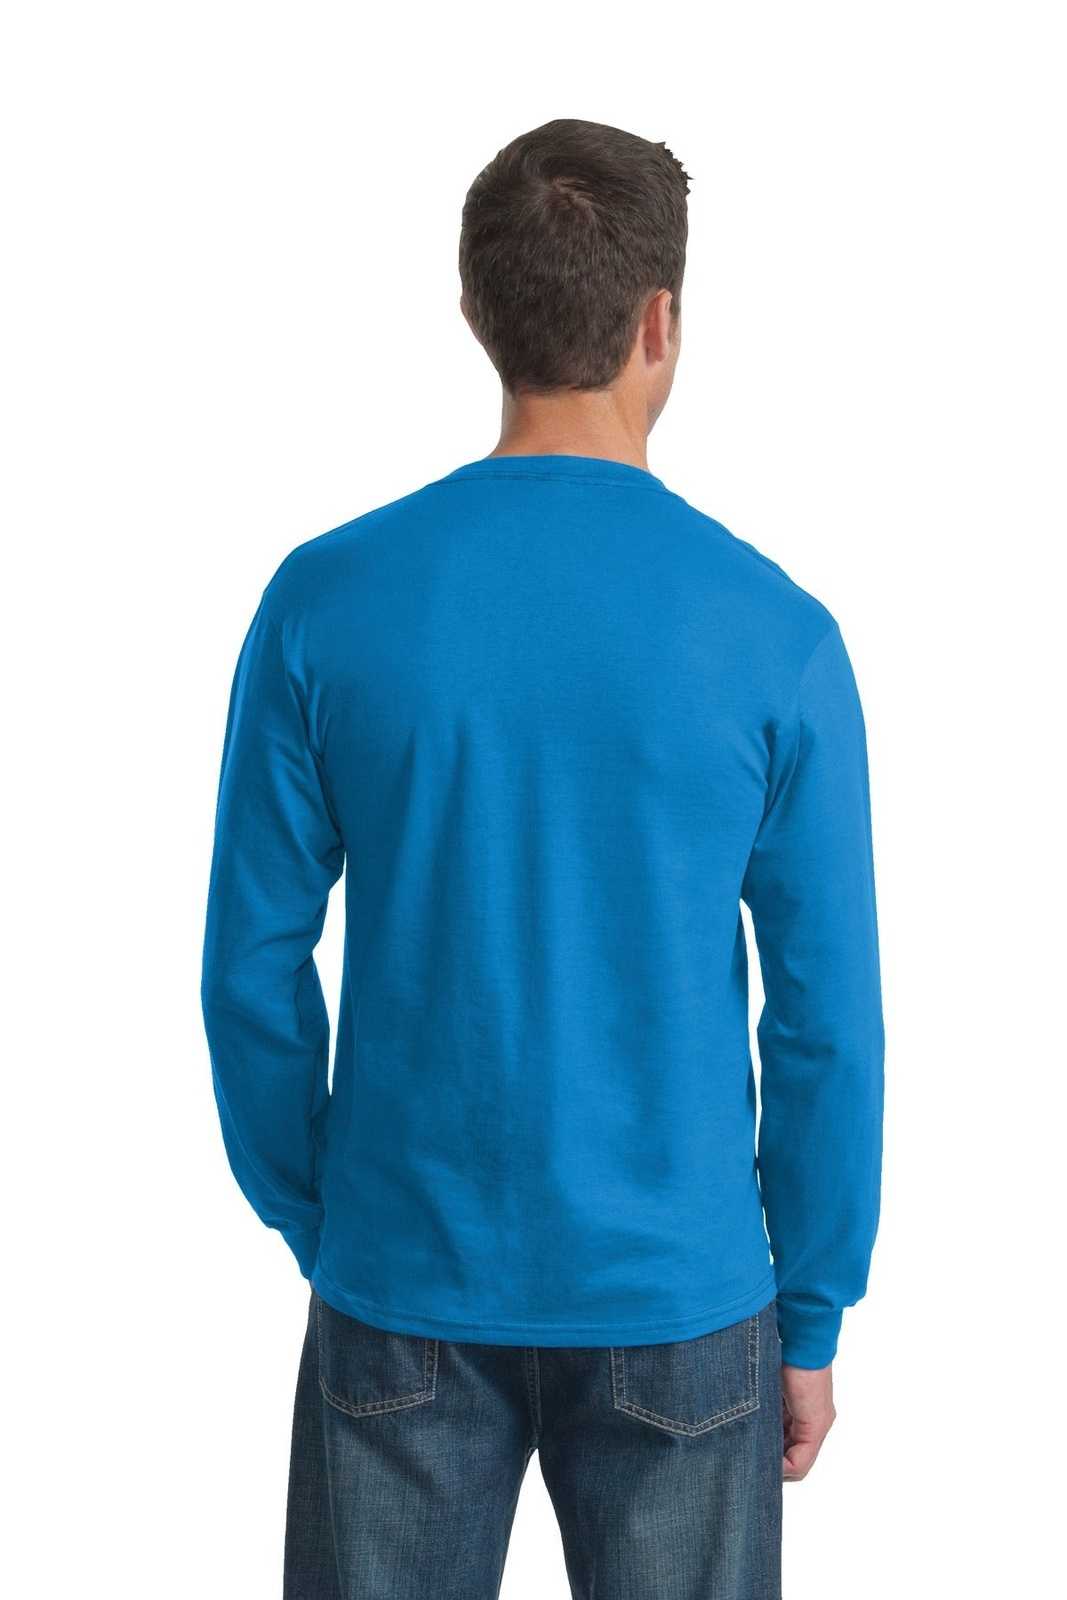 Fruit of the Loom 4930 HD Cotton 100% Cotton Long Sleeve T-Shirt - Pacific Blue - HIT a Double